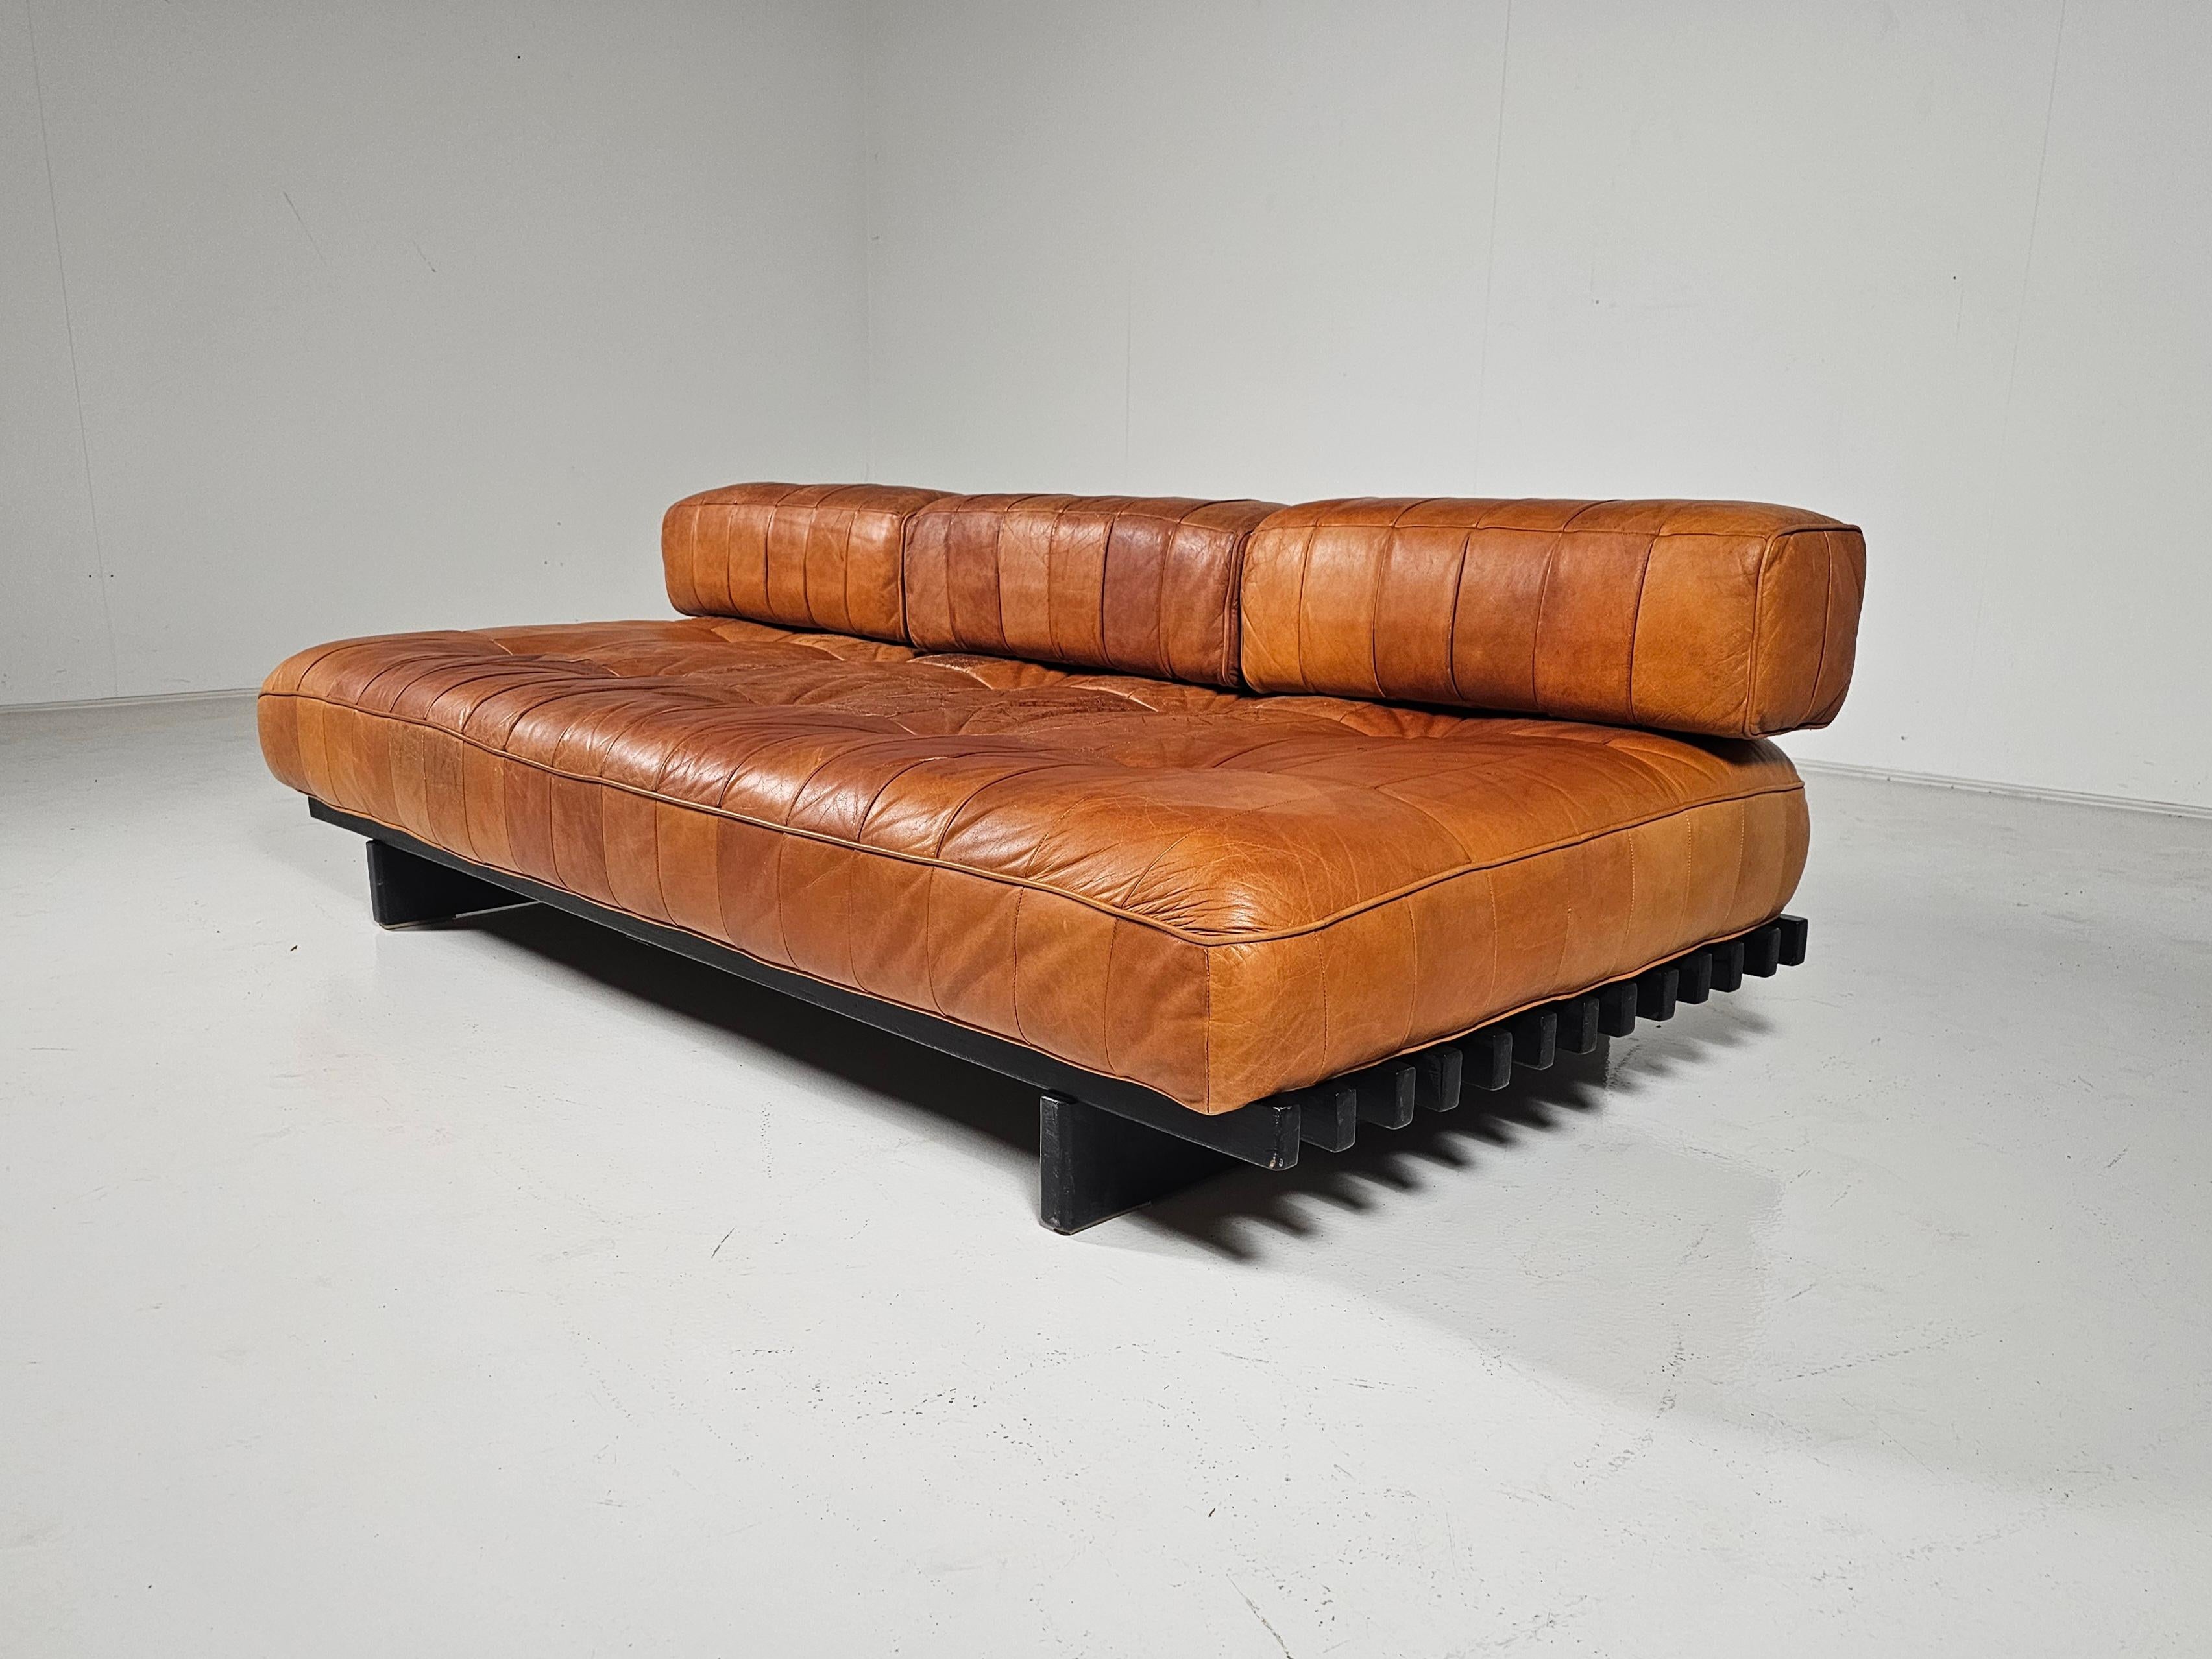 De Sede DS80 cognac leather patchwork daybed, Switzerland, 1970. Upholstered in its beautiful and soft original aniline leather with amazing wear.

The DS-80 sofa unites all of the characteristics of De Sede‘s furniture. Excellent manufacturing